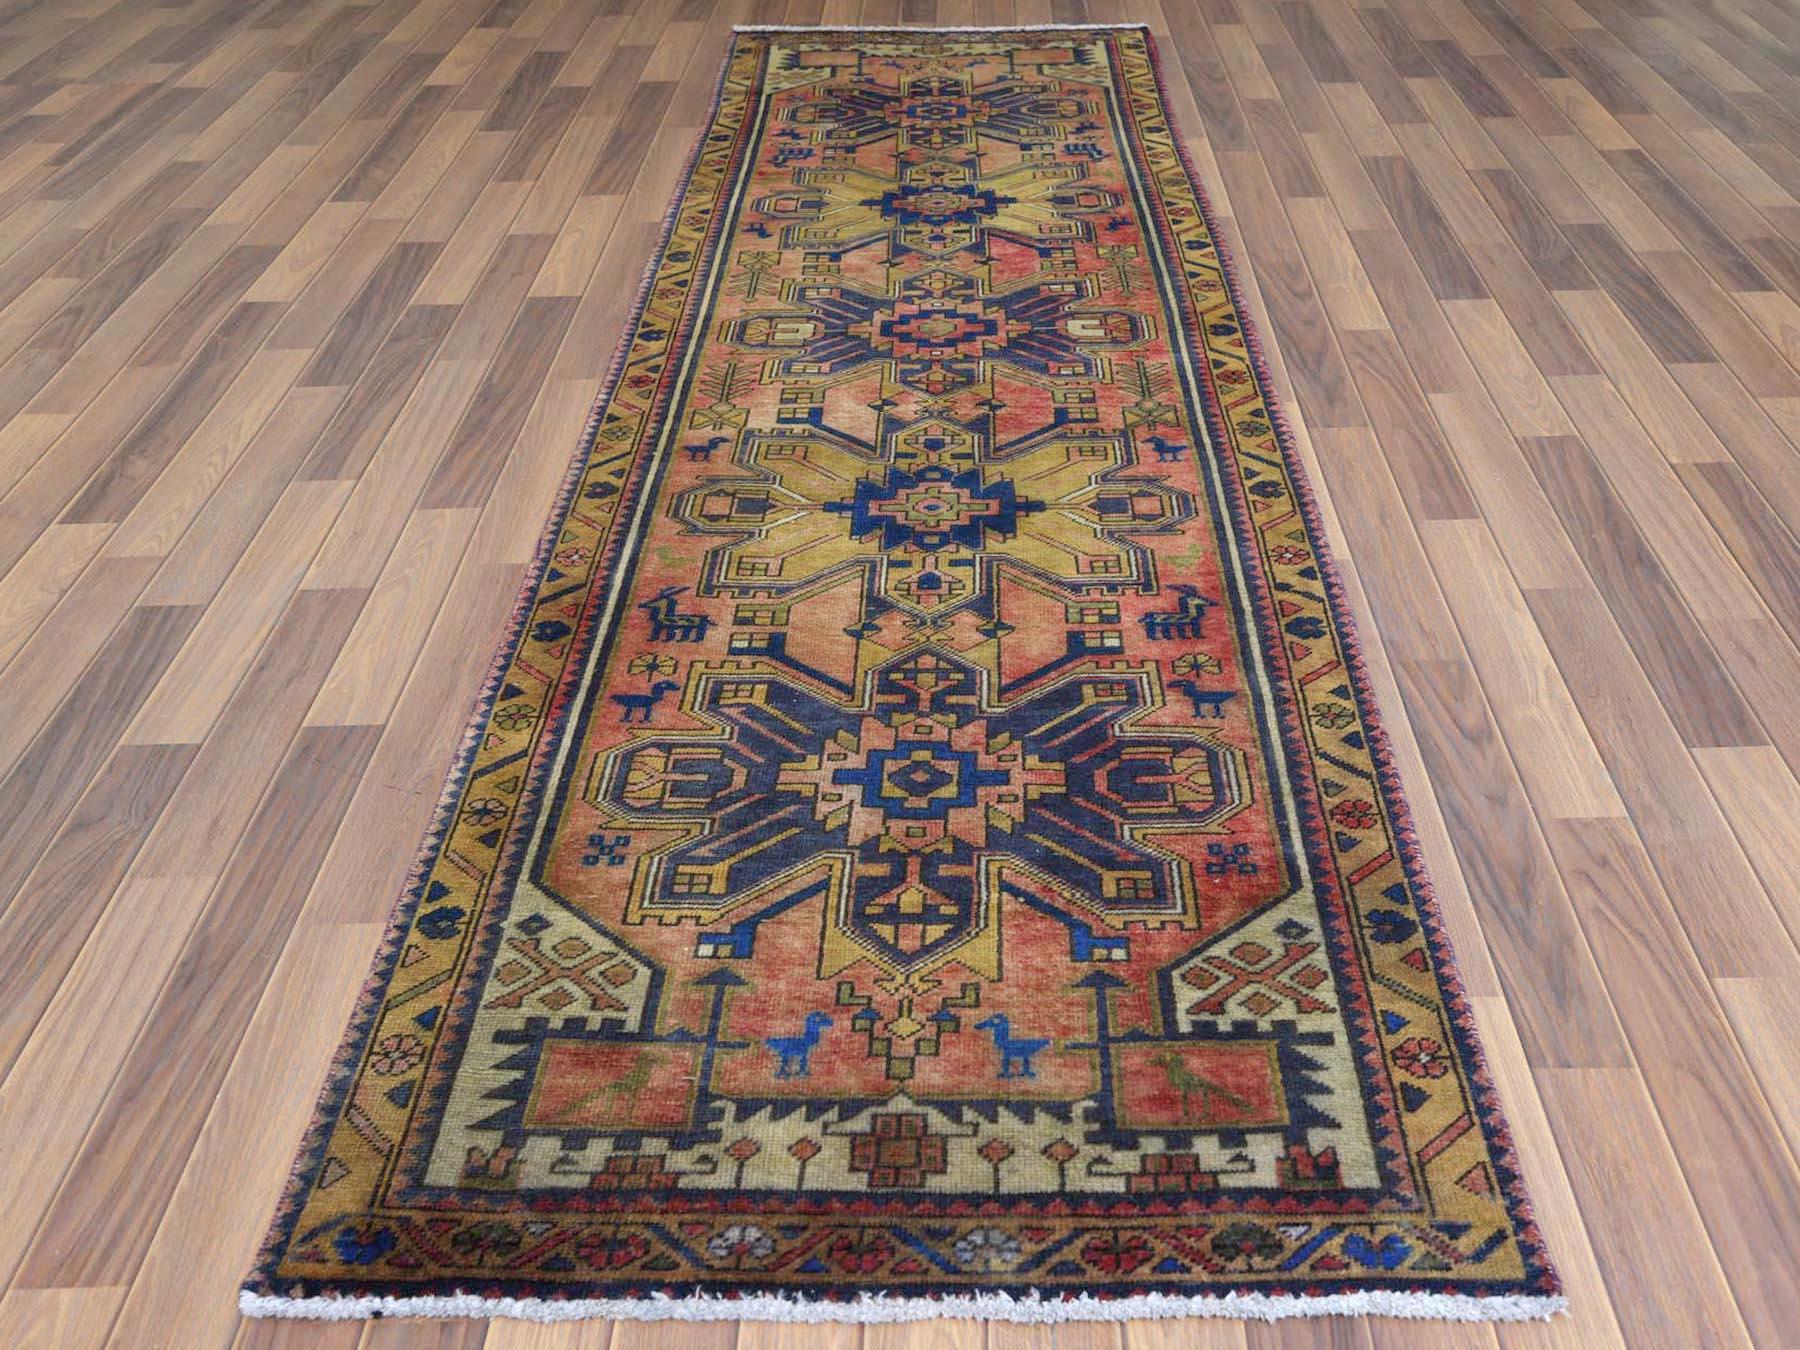 This fabulous hand-knotted carpet has been created and designed for extra strength and durability. This rug has been handcrafted for weeks in the traditional method that is used to make
Exact rug size in feet and inches : 3'3